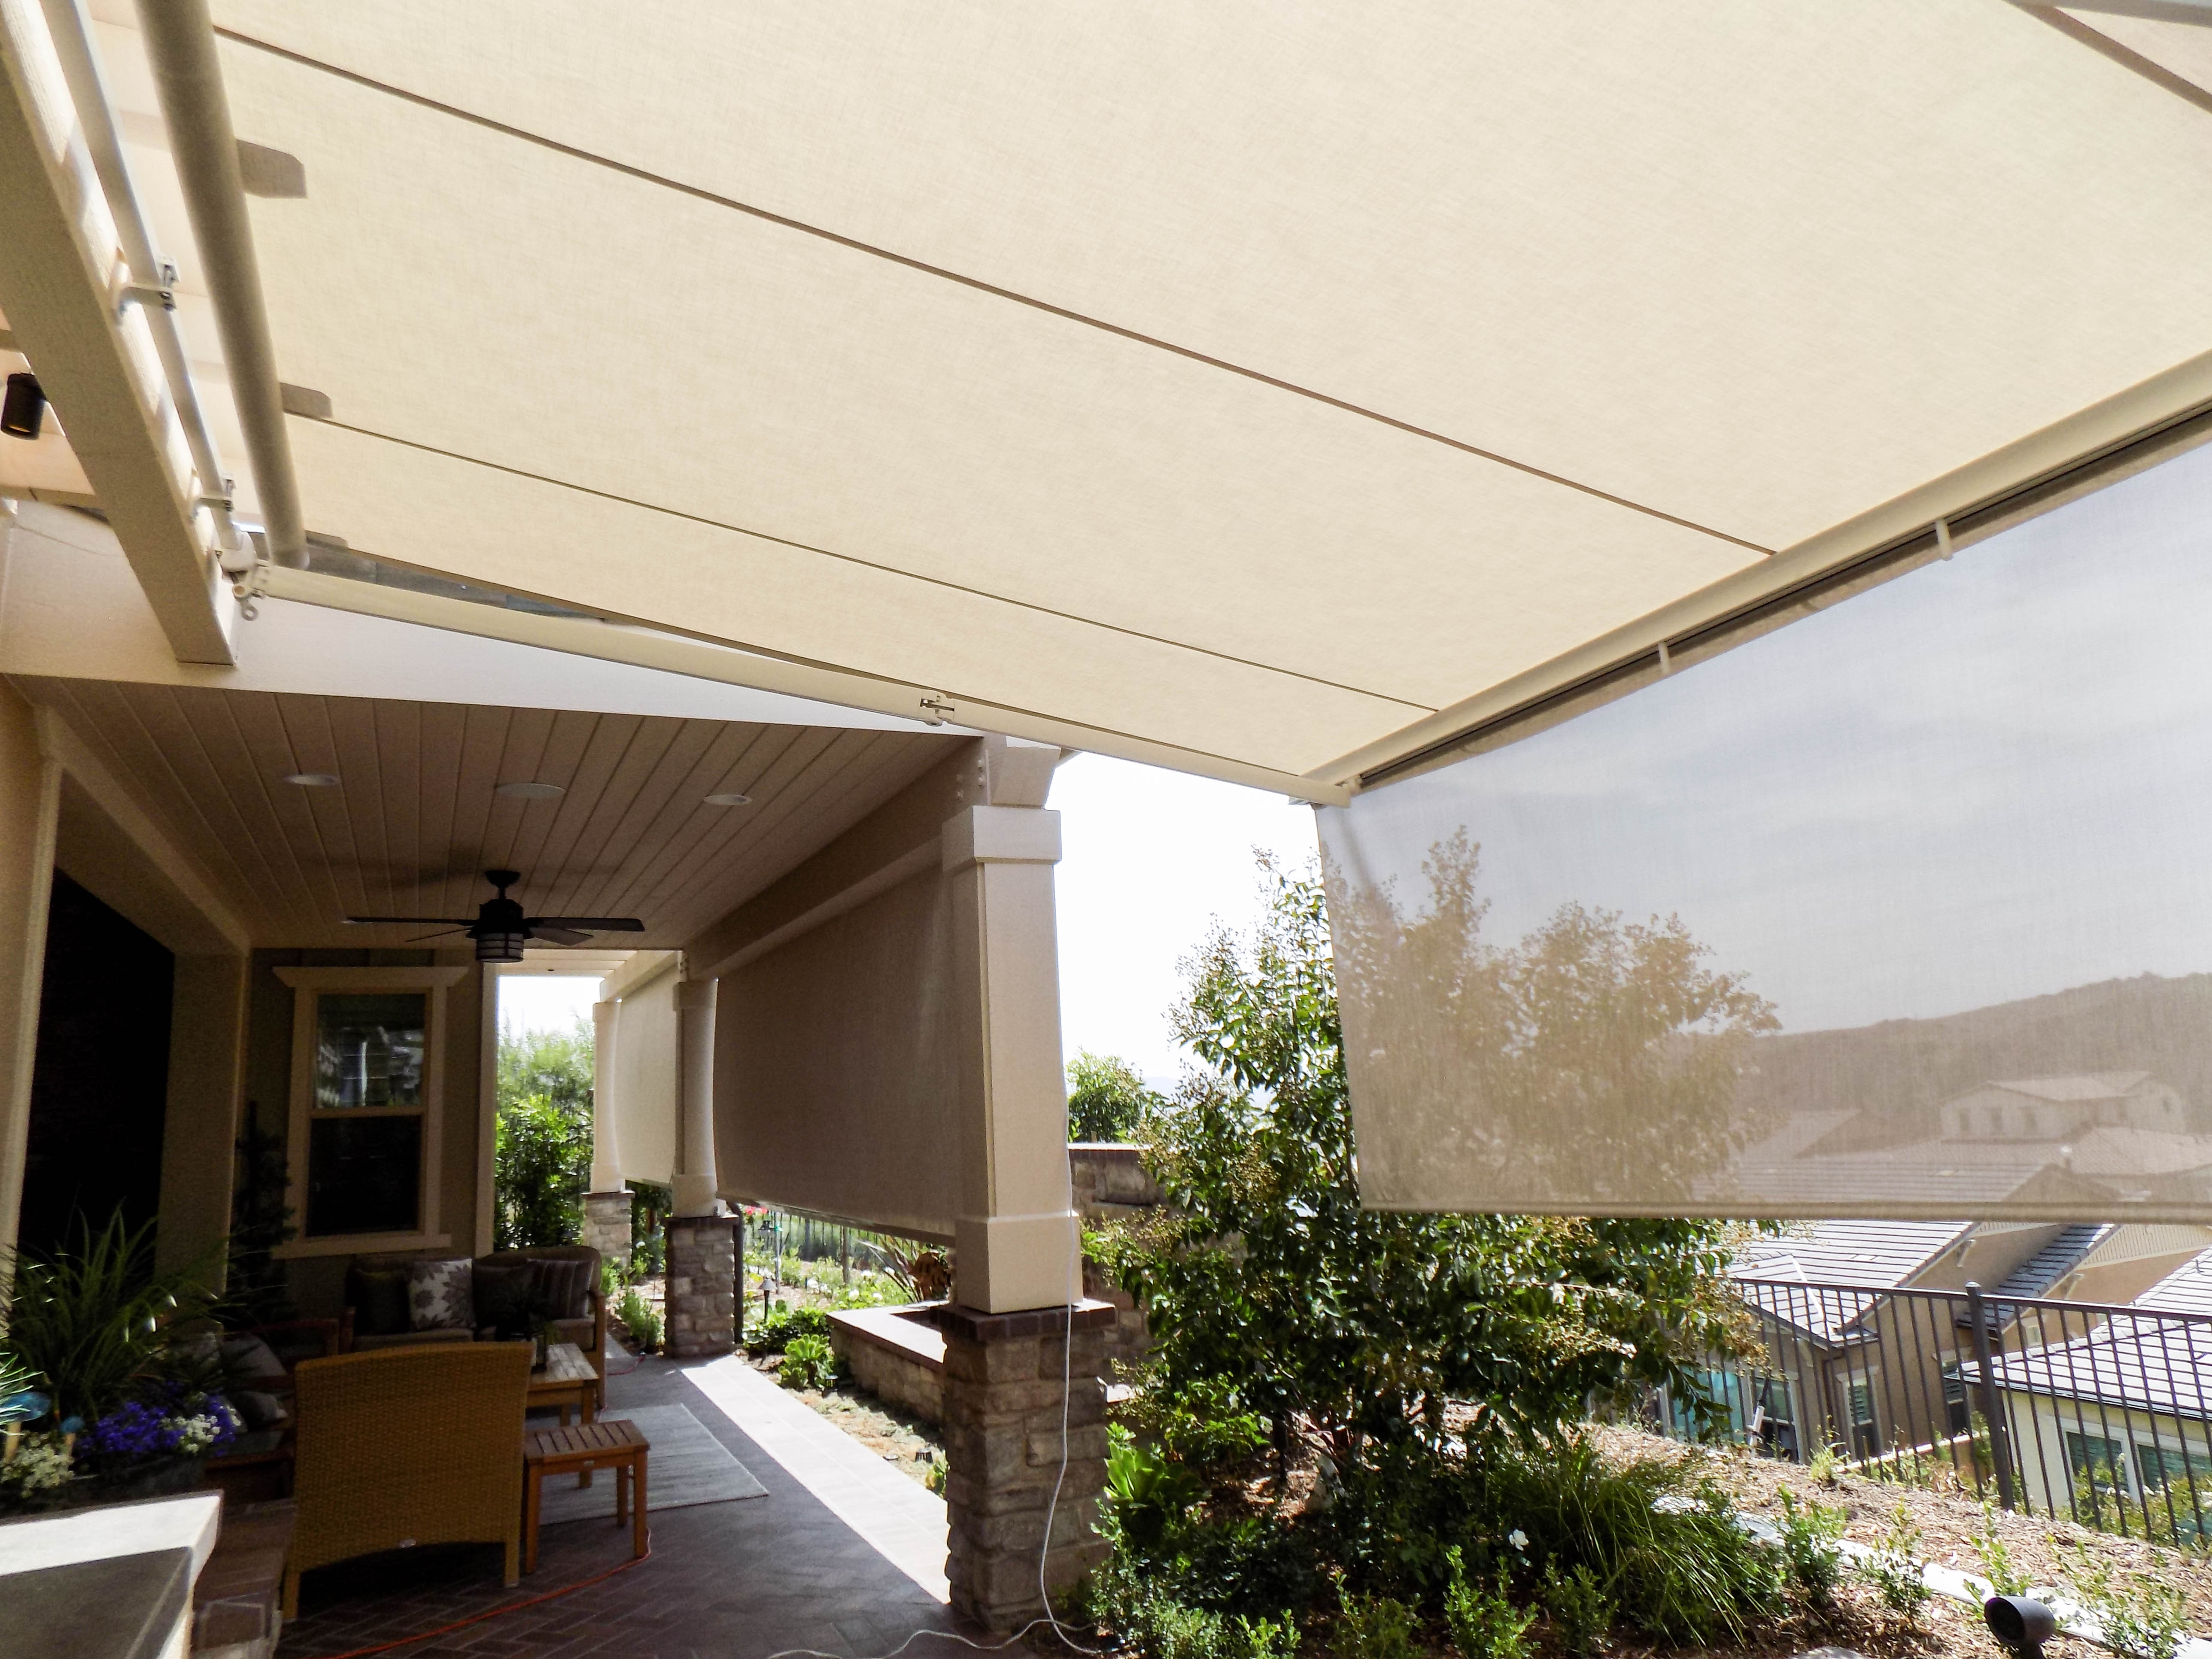 Retractable Awning with a Drop Valence and two Motorized Power Screens